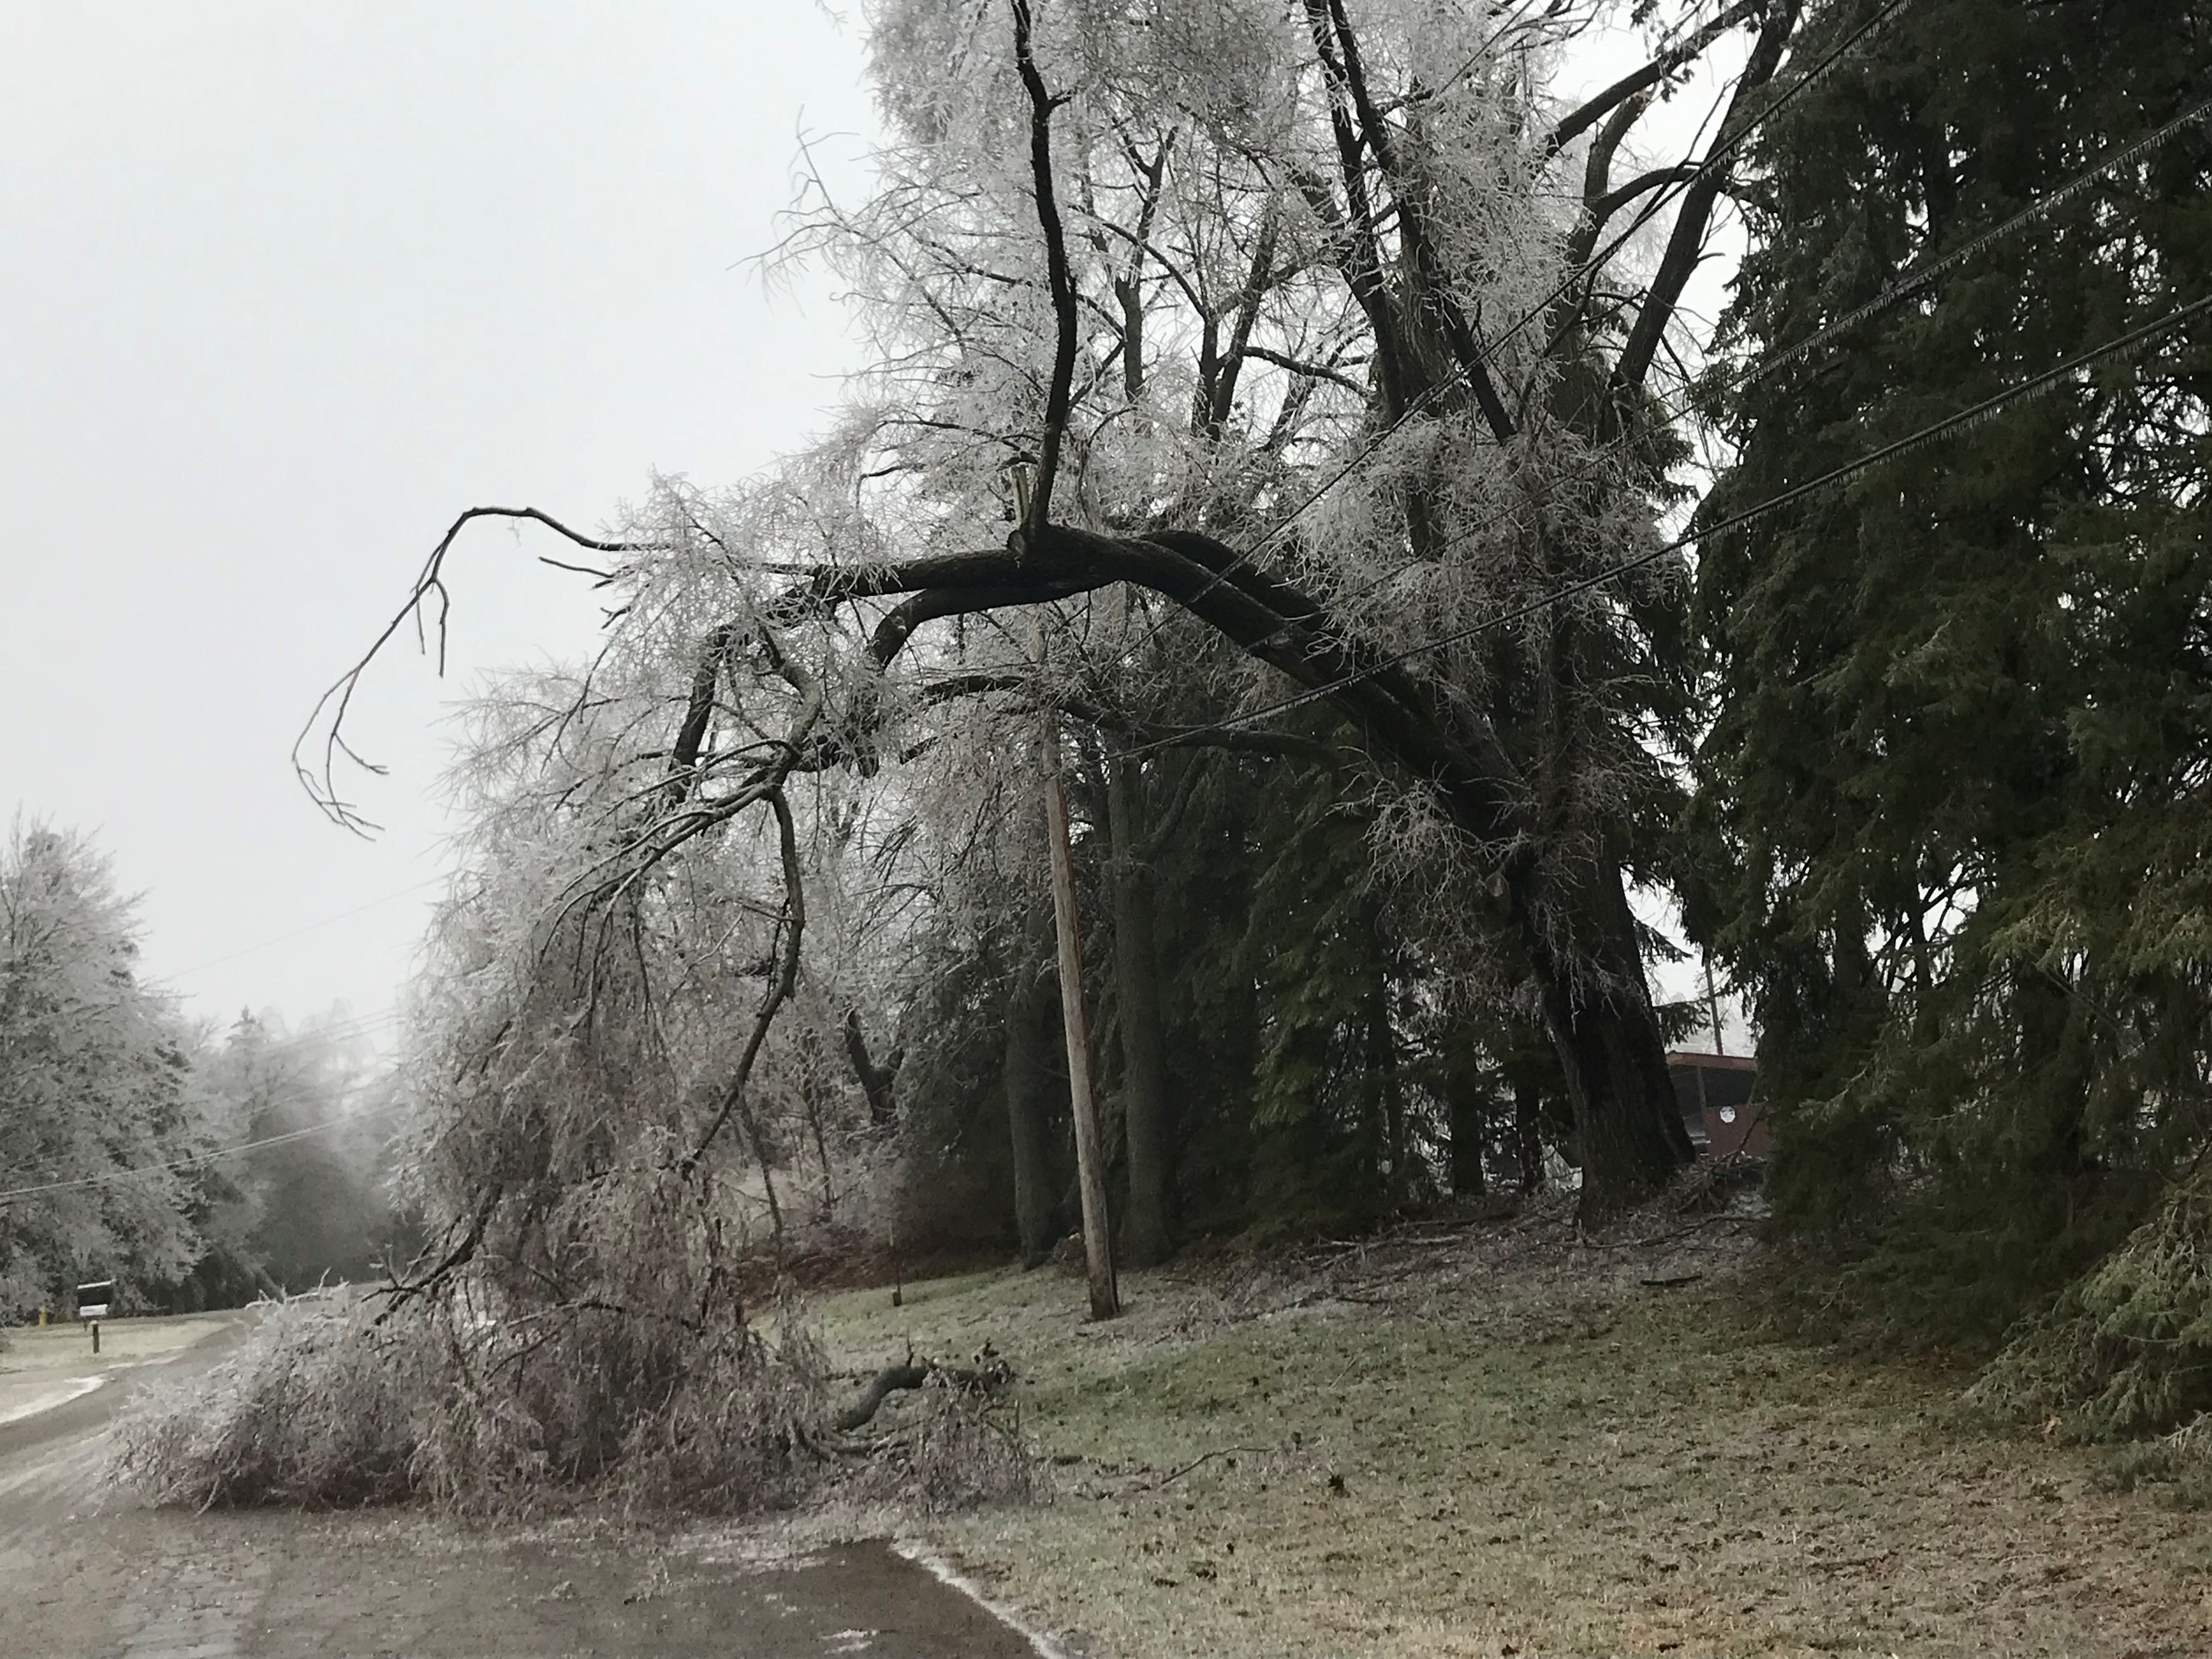 Tree branch pickup plans announced for Ann Arbor, Ypsilanti areas following  ice storm